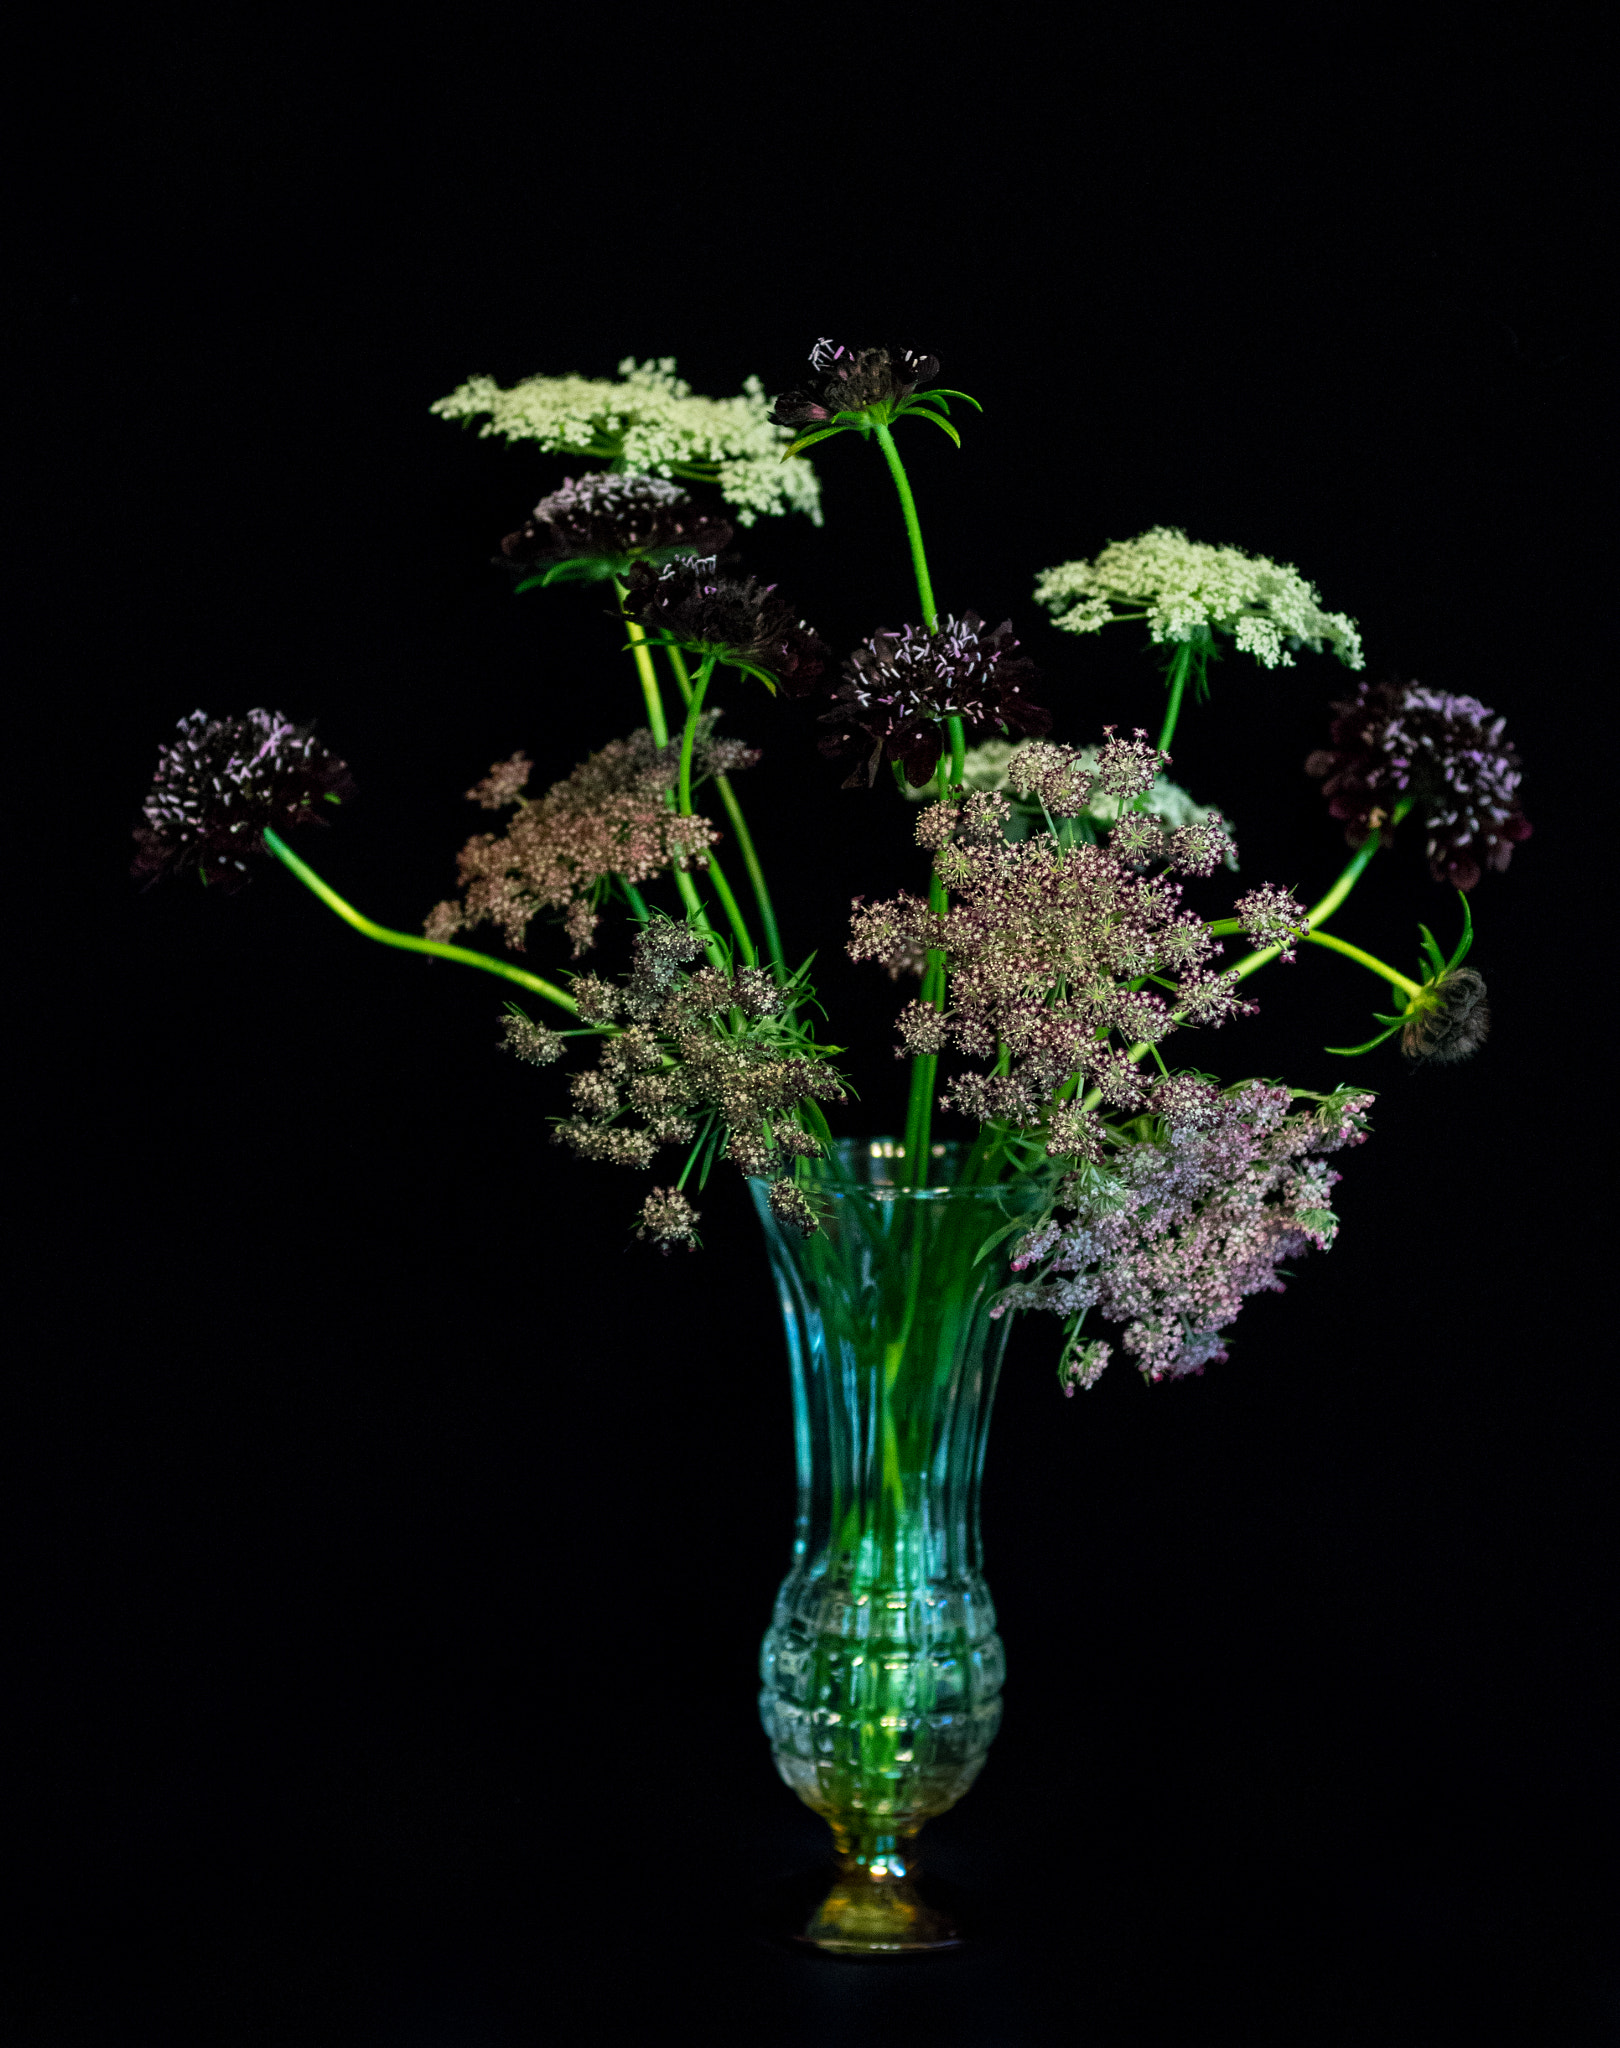 Pentax K-3 sample photo. Queen anne's lace with scabiosa photography